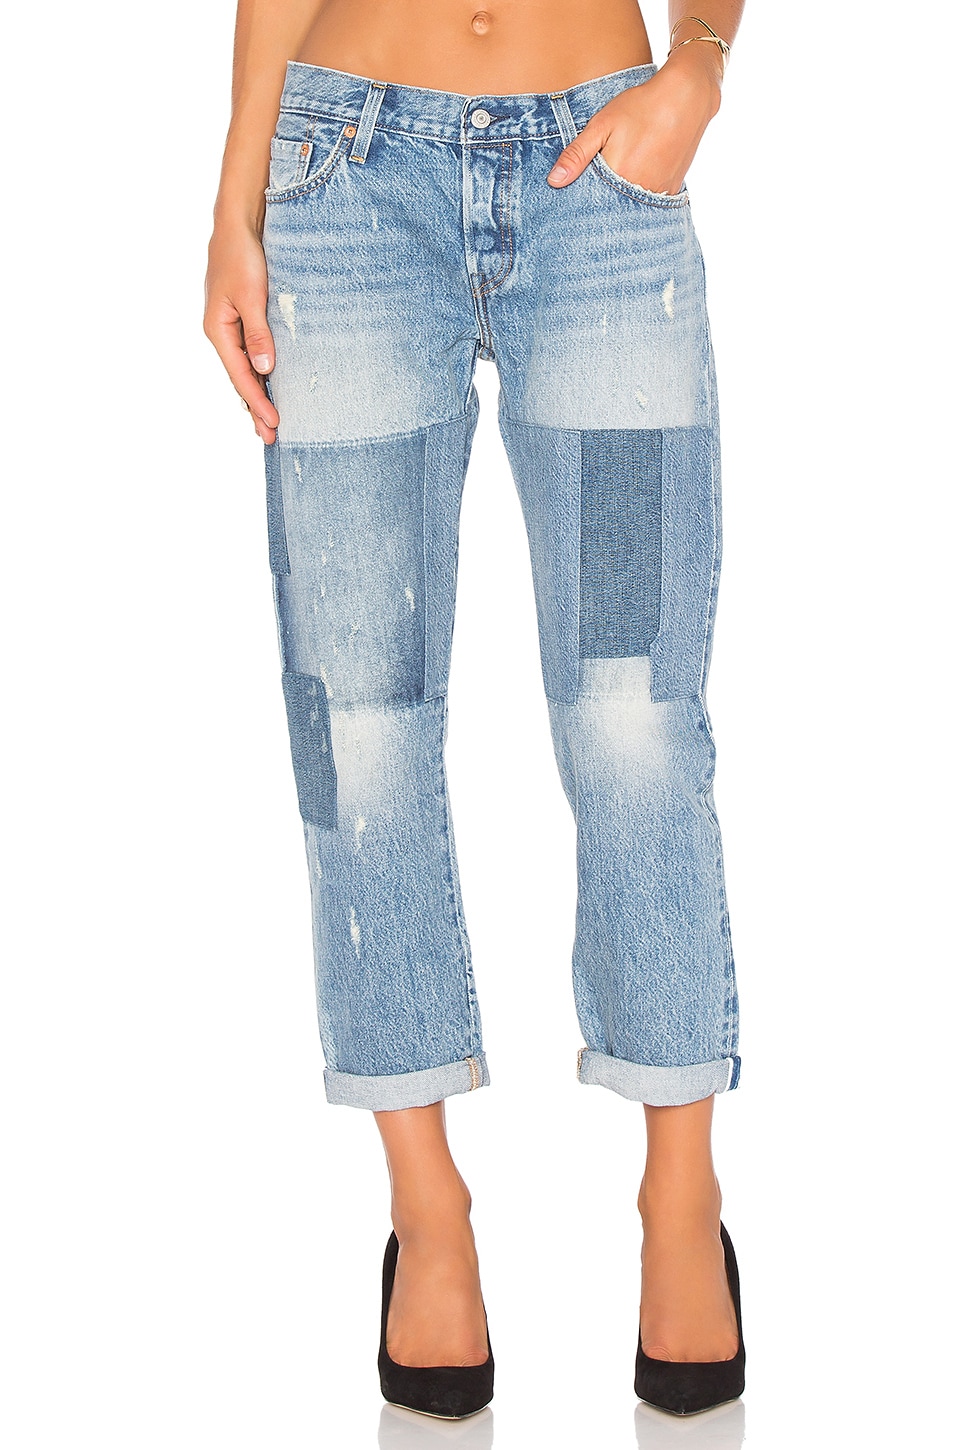 LEVI'S 501 CT in Stacked Patch | REVOLVE